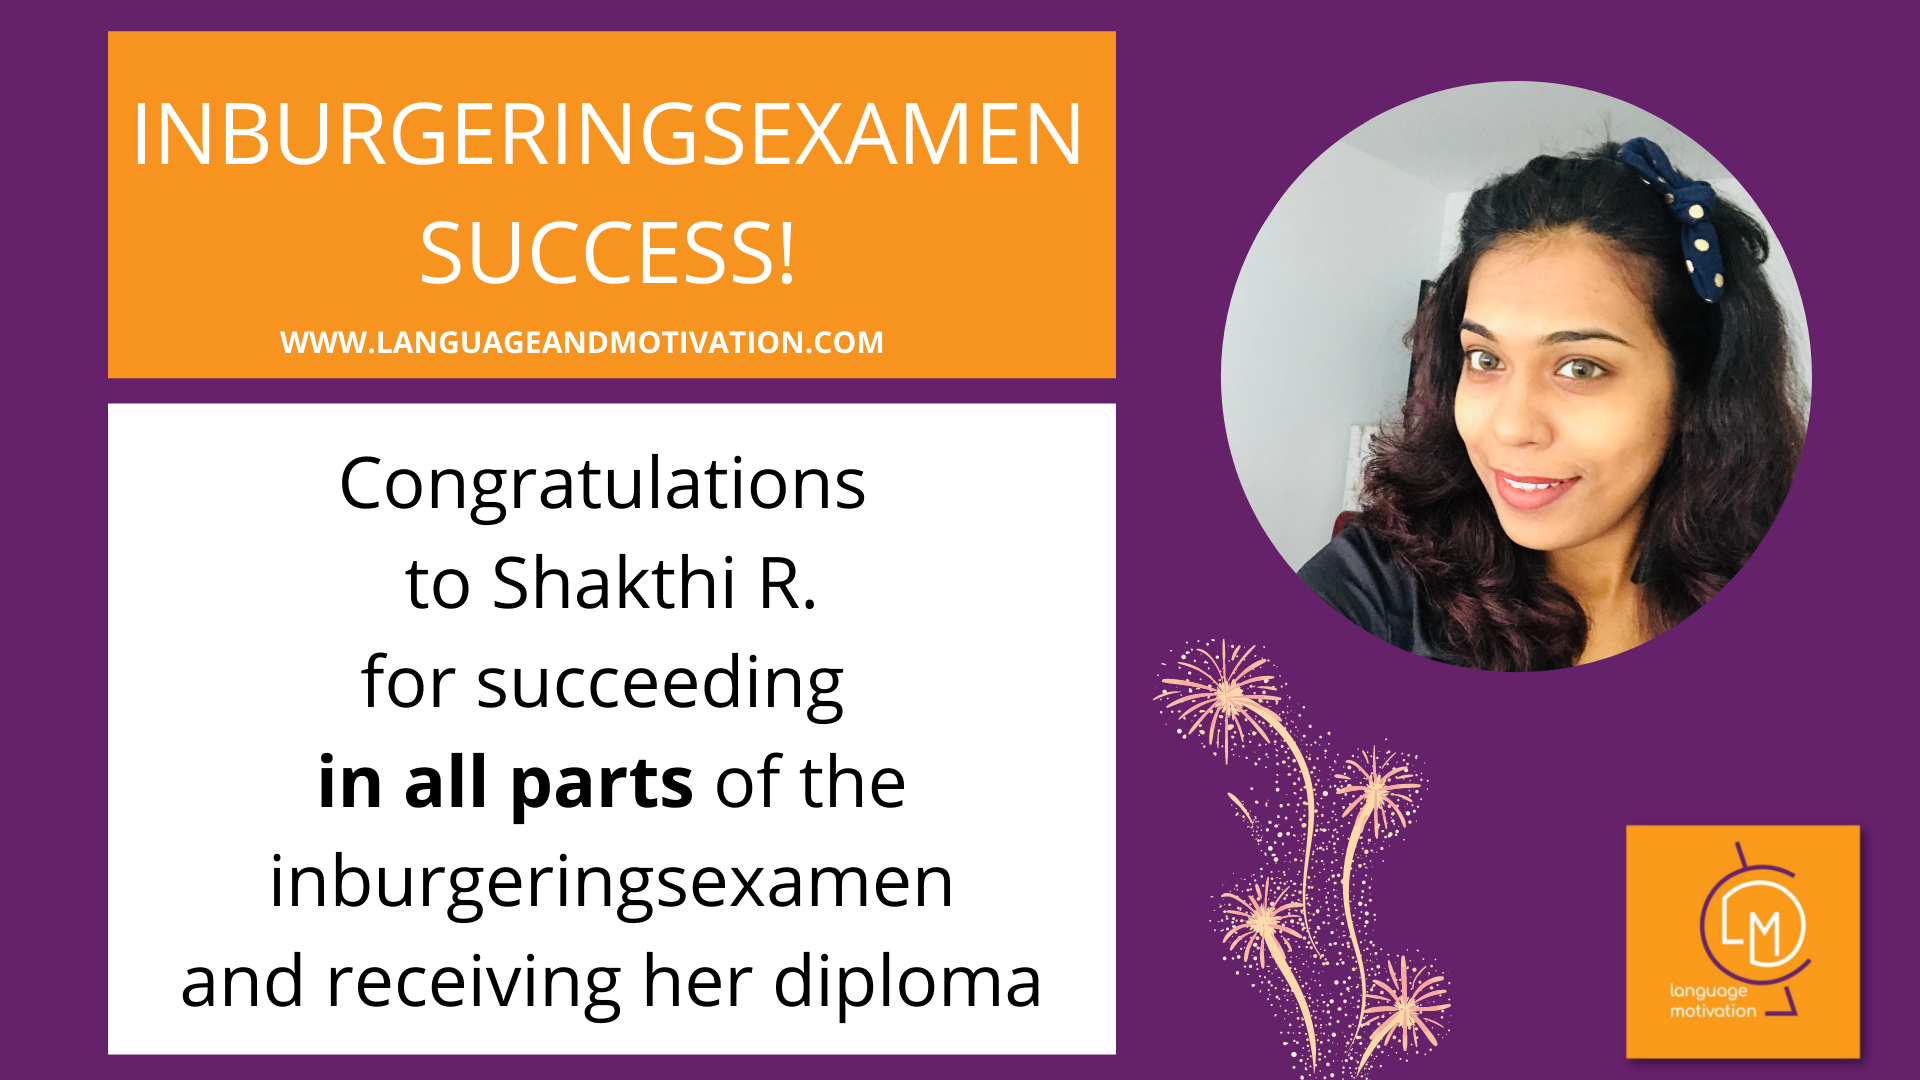 Congratulations to Shakthi R. for succeeding in all parts of #inburgeringsdiploma